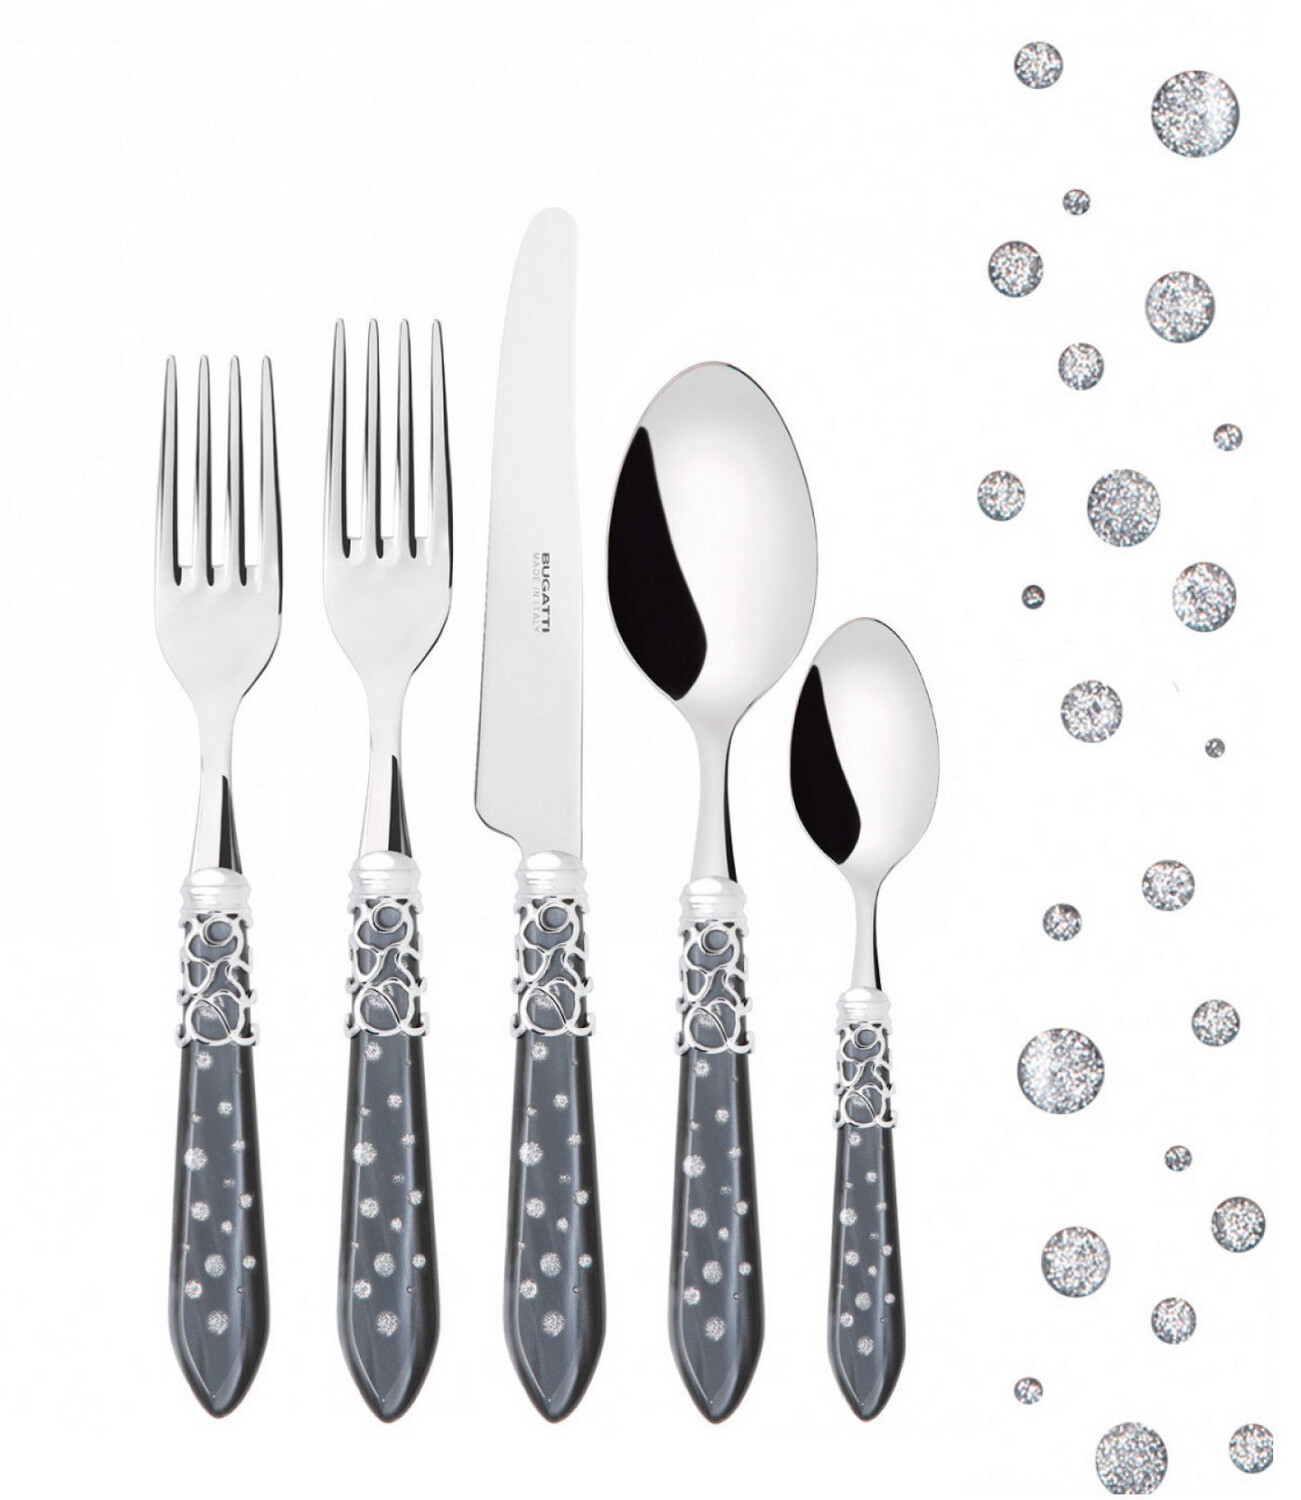 Melodia Galleria 5 Piece Place Setting charcoal